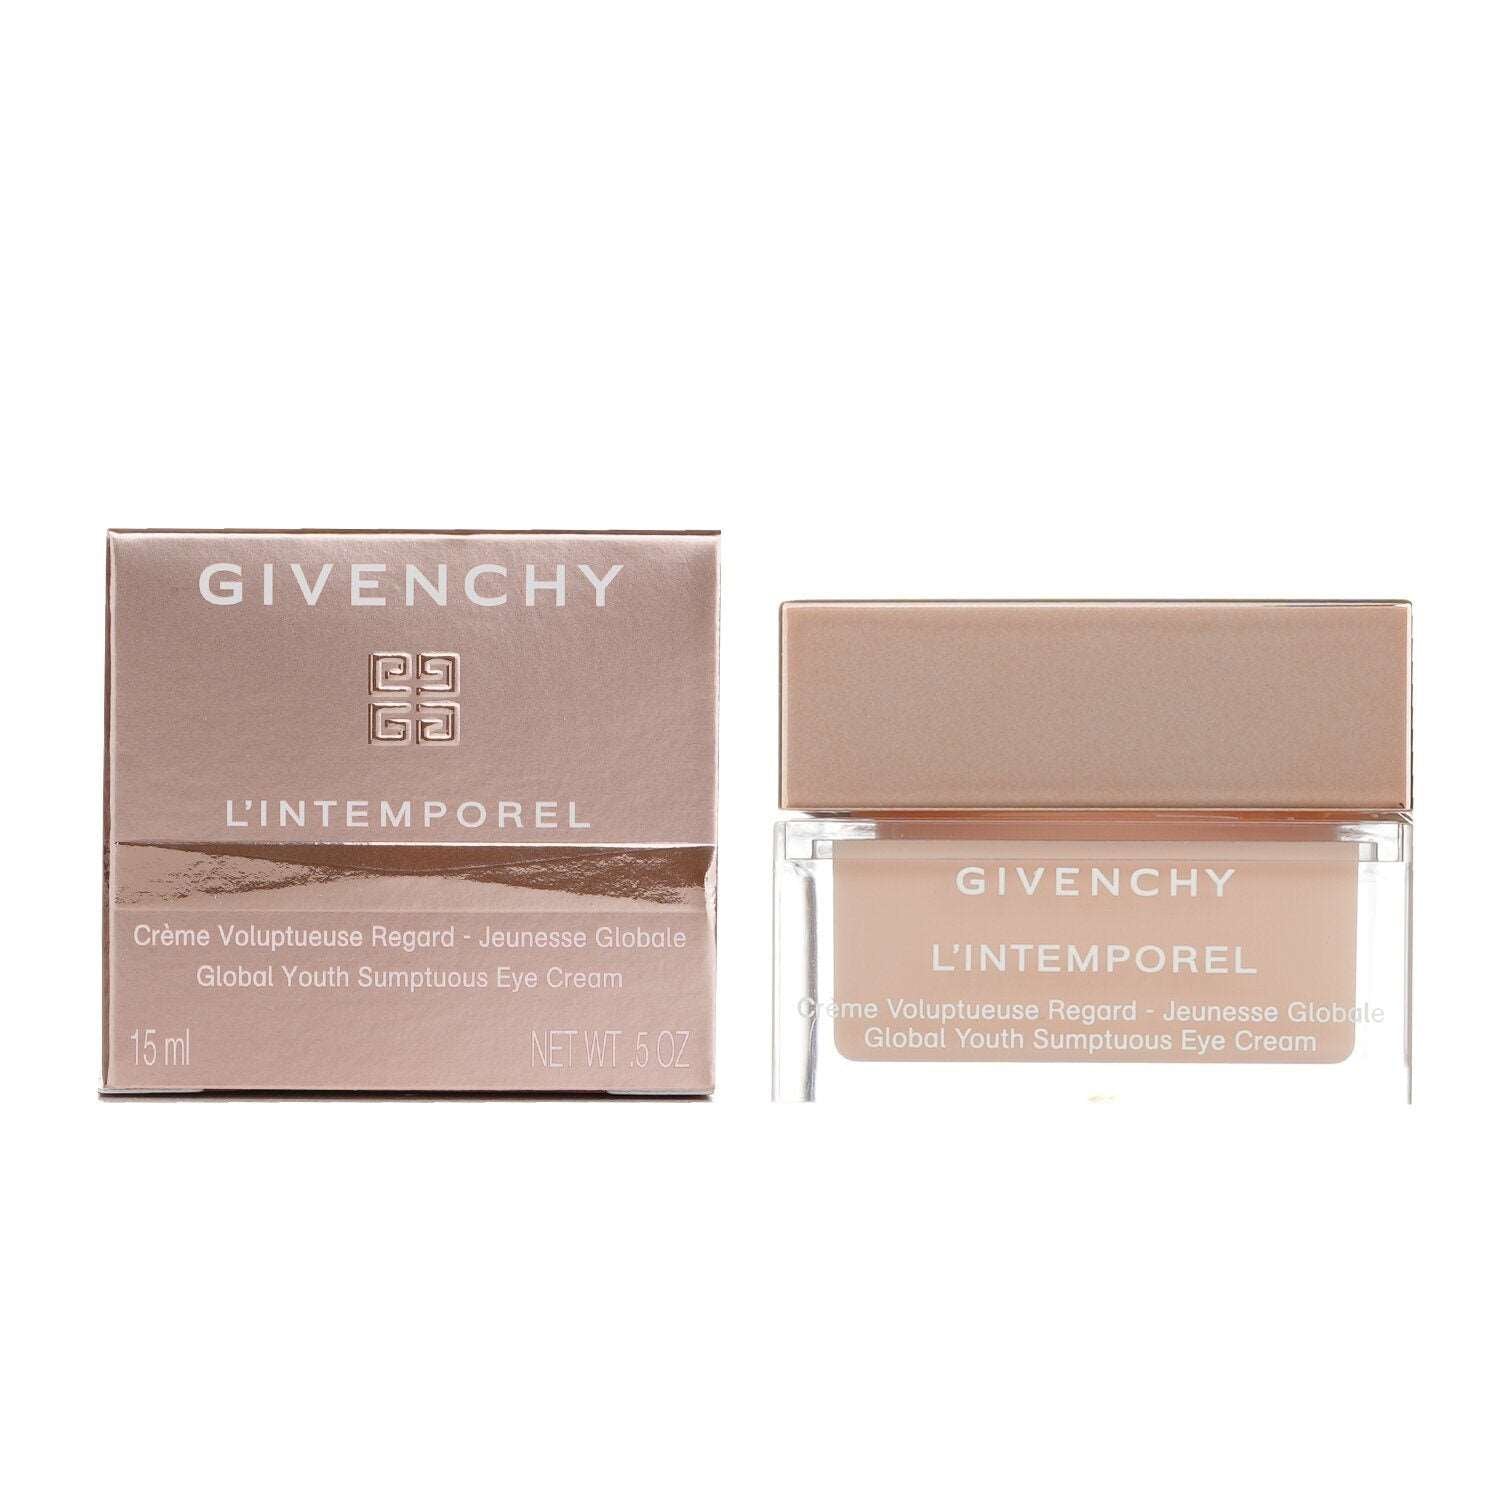 GIVENCHY - L'Intemporel Global Youth Sumptuous Eye Cream - 15ml/0.5oz~3P's Inclusive Beauty